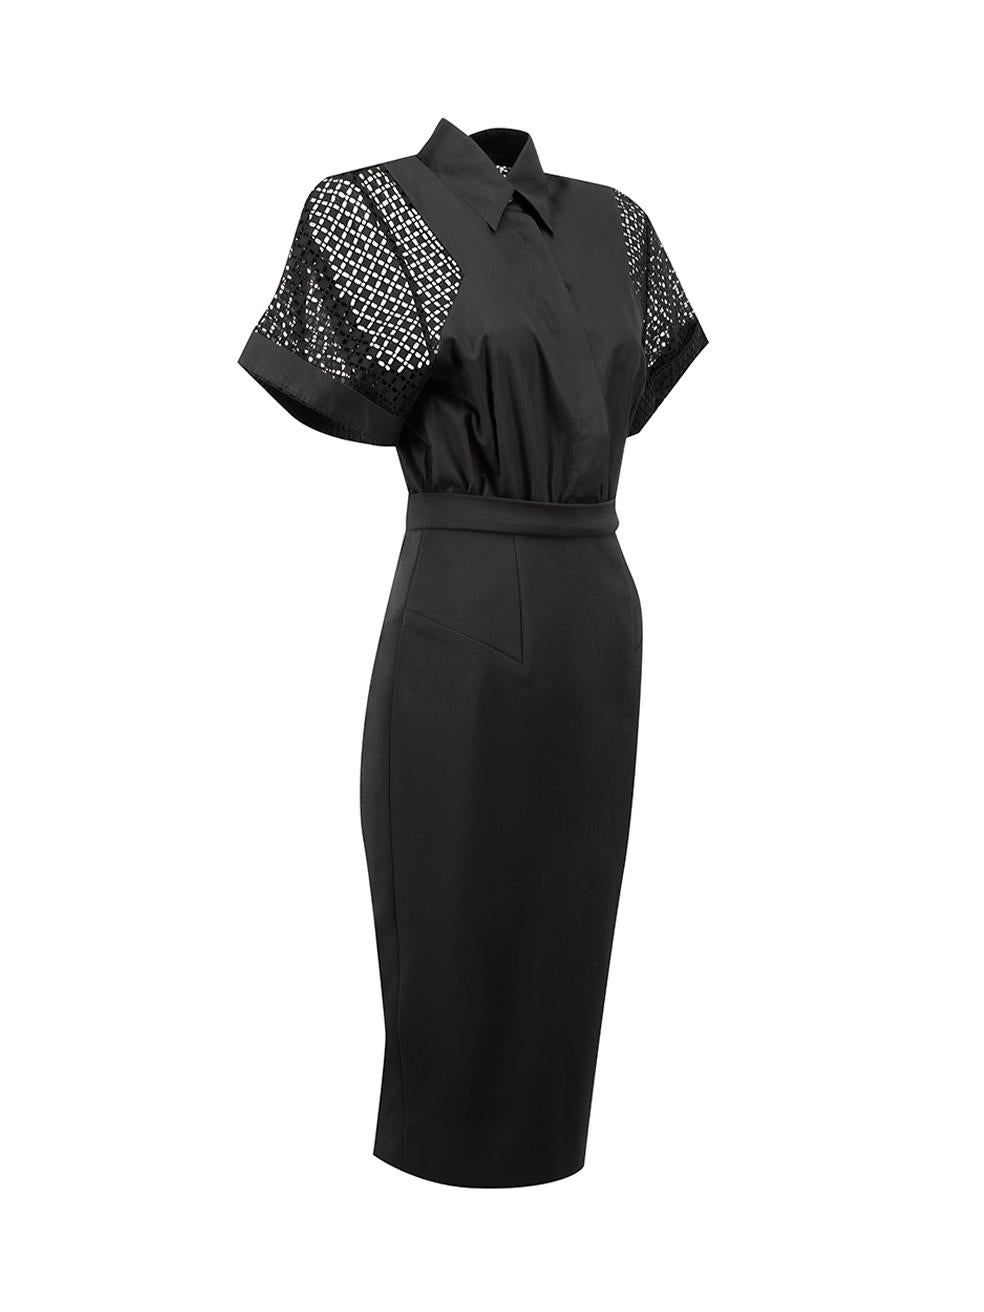 CONDITION is Very good. Minimal wear to dress is evident. Minimal wear to the front skirt with small pull to the weave on this used Victoria Beckham designer resale item.



Details


Black

Cotton

Midi dress

Figure hugging fit

Short lace